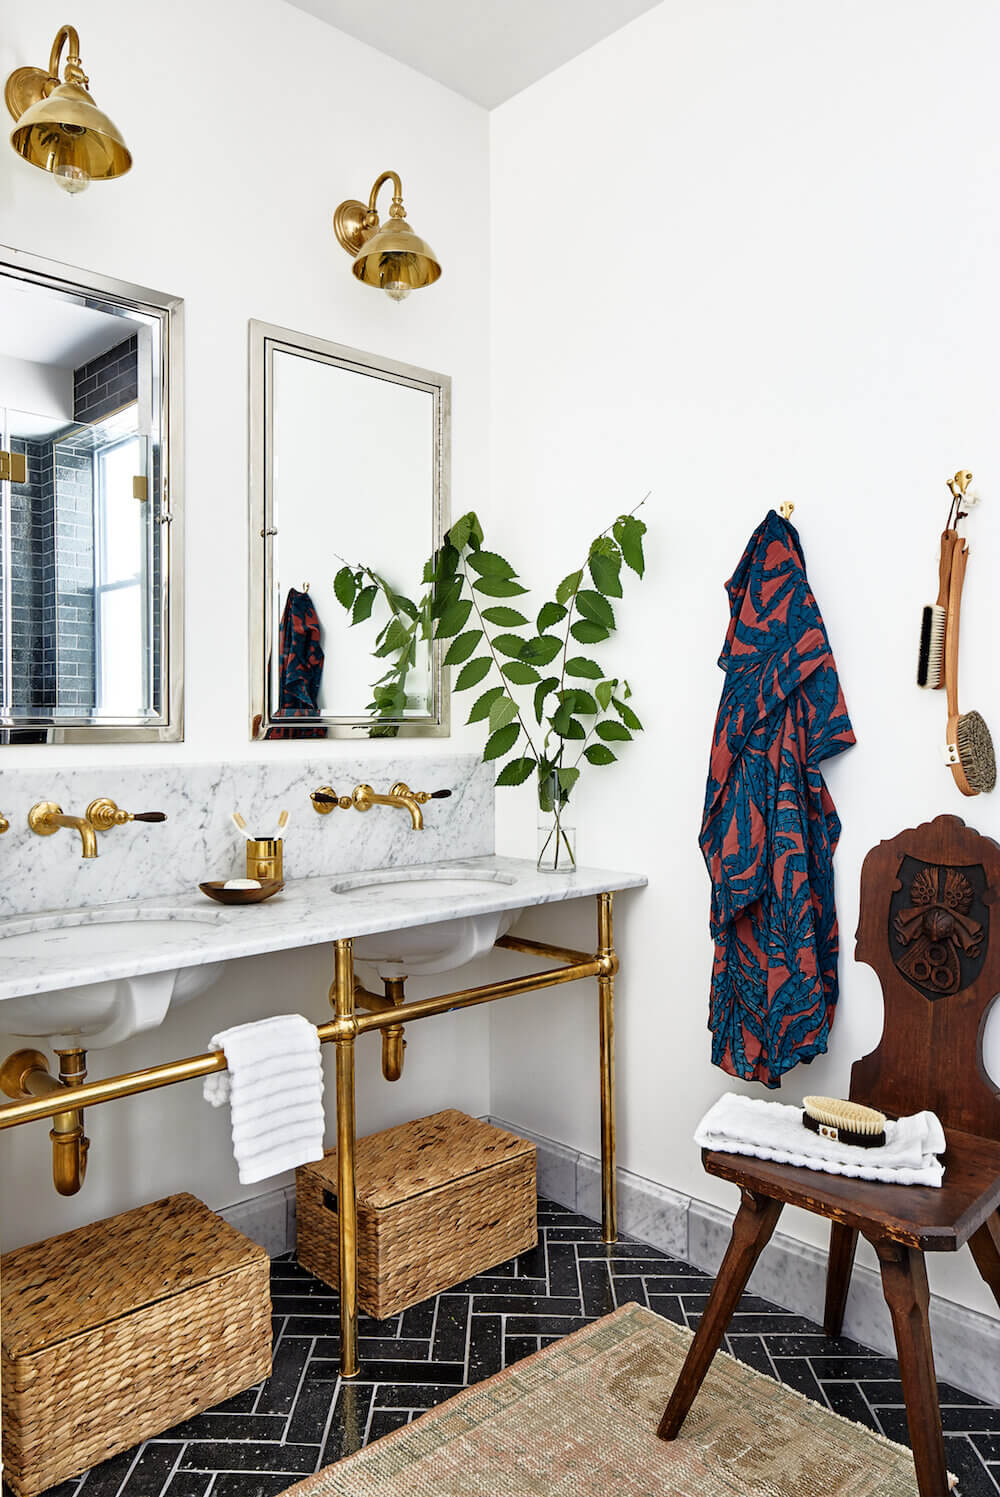 AnEclecticTownhousewithColorfulTouches TheNordroom14 An Eclectic Washington Townhouse with Colorful Touches